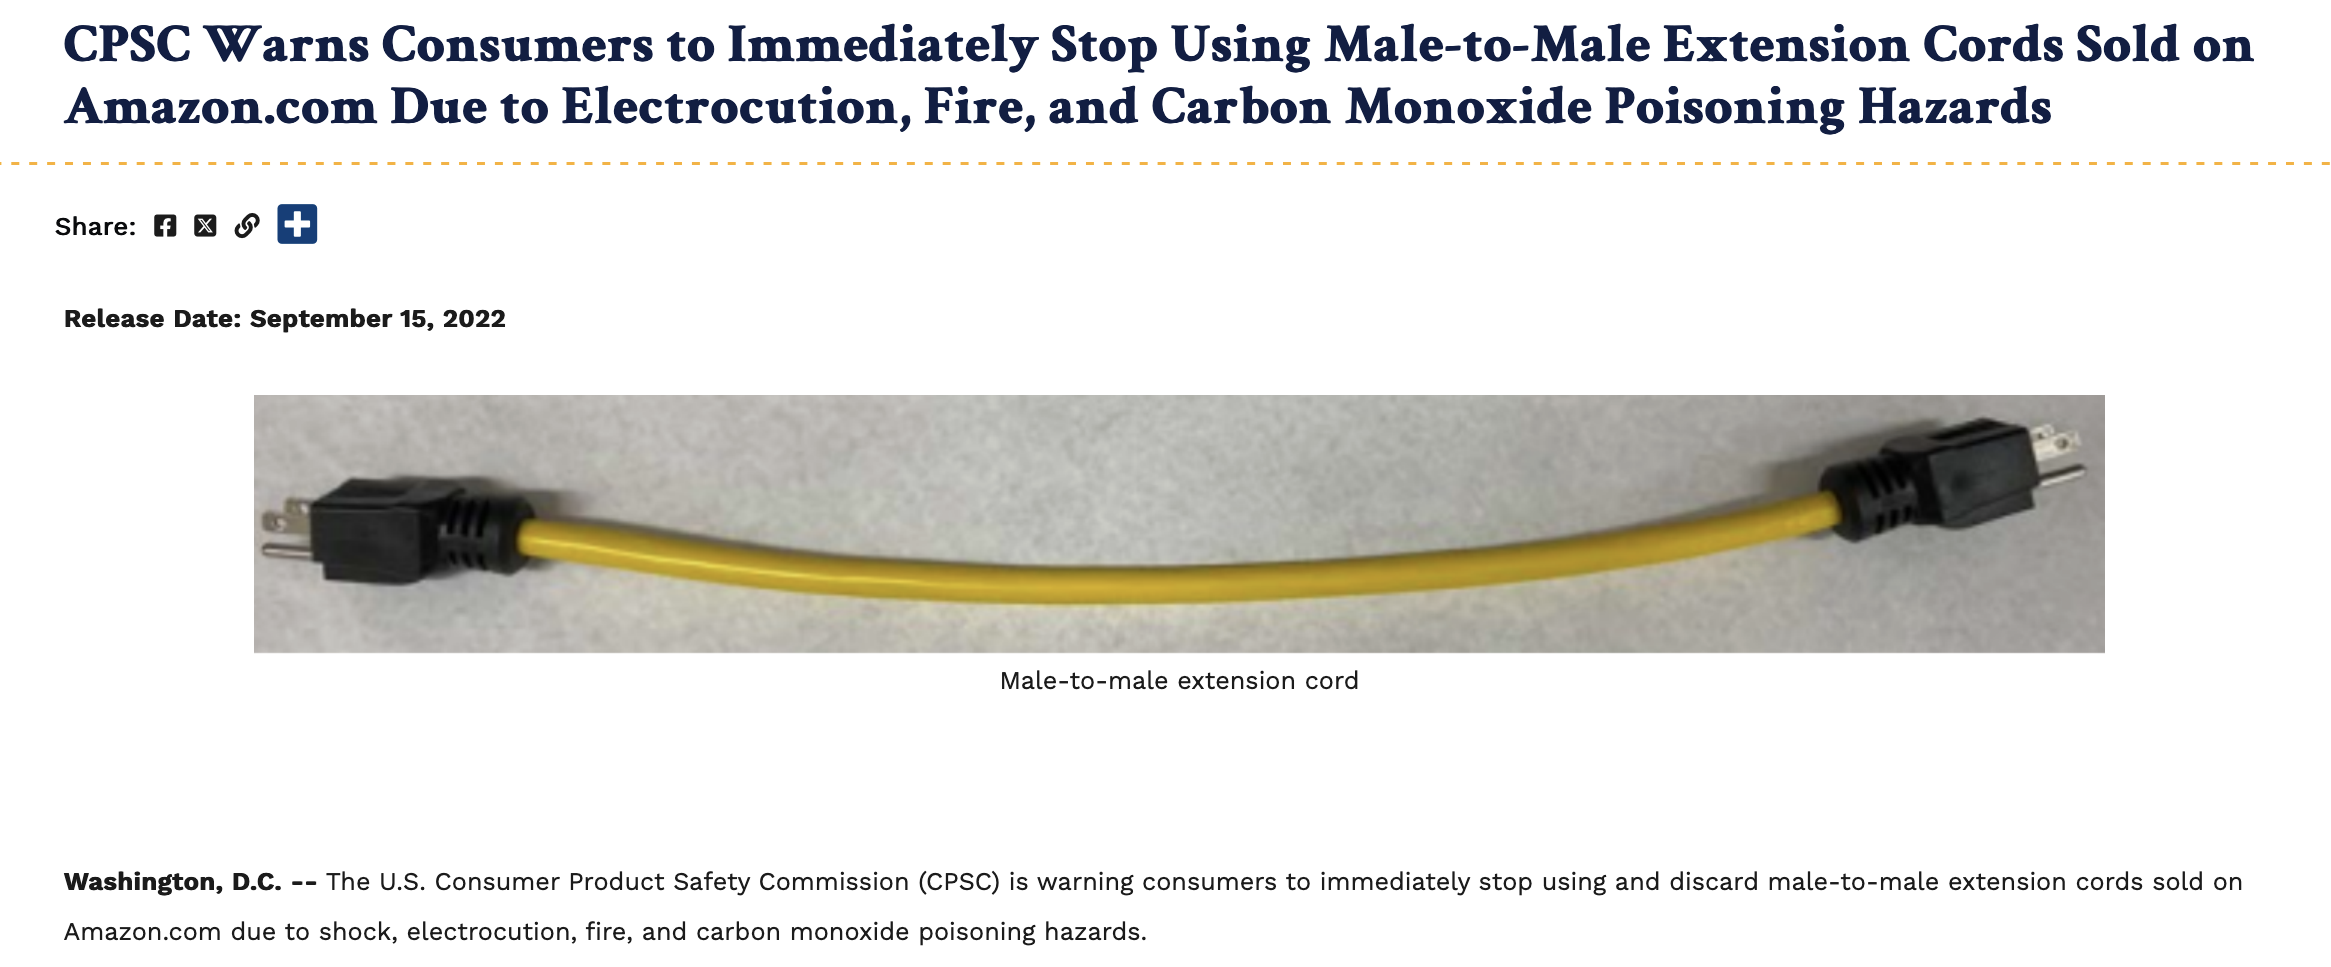 screenshot of USCPSC press release, titled "CPSC Warns Consumers to Immediately Stop Using Male-to-Male Extension Cords Sold on Amazon.com Due to Electrocution, Fire, and Carbon Monoxide Poisoning Hazards", Release Date: September 15, 2022, contents: "Washington, D.C. -- The U.S. Consumer Product Safety Commission (CPSC) is warning consumers to immediately stop using and discard male-to-male extension cords sold on Amazon.com due to shock, electrocution, fire, and carbon monoxide poisoning hazards."